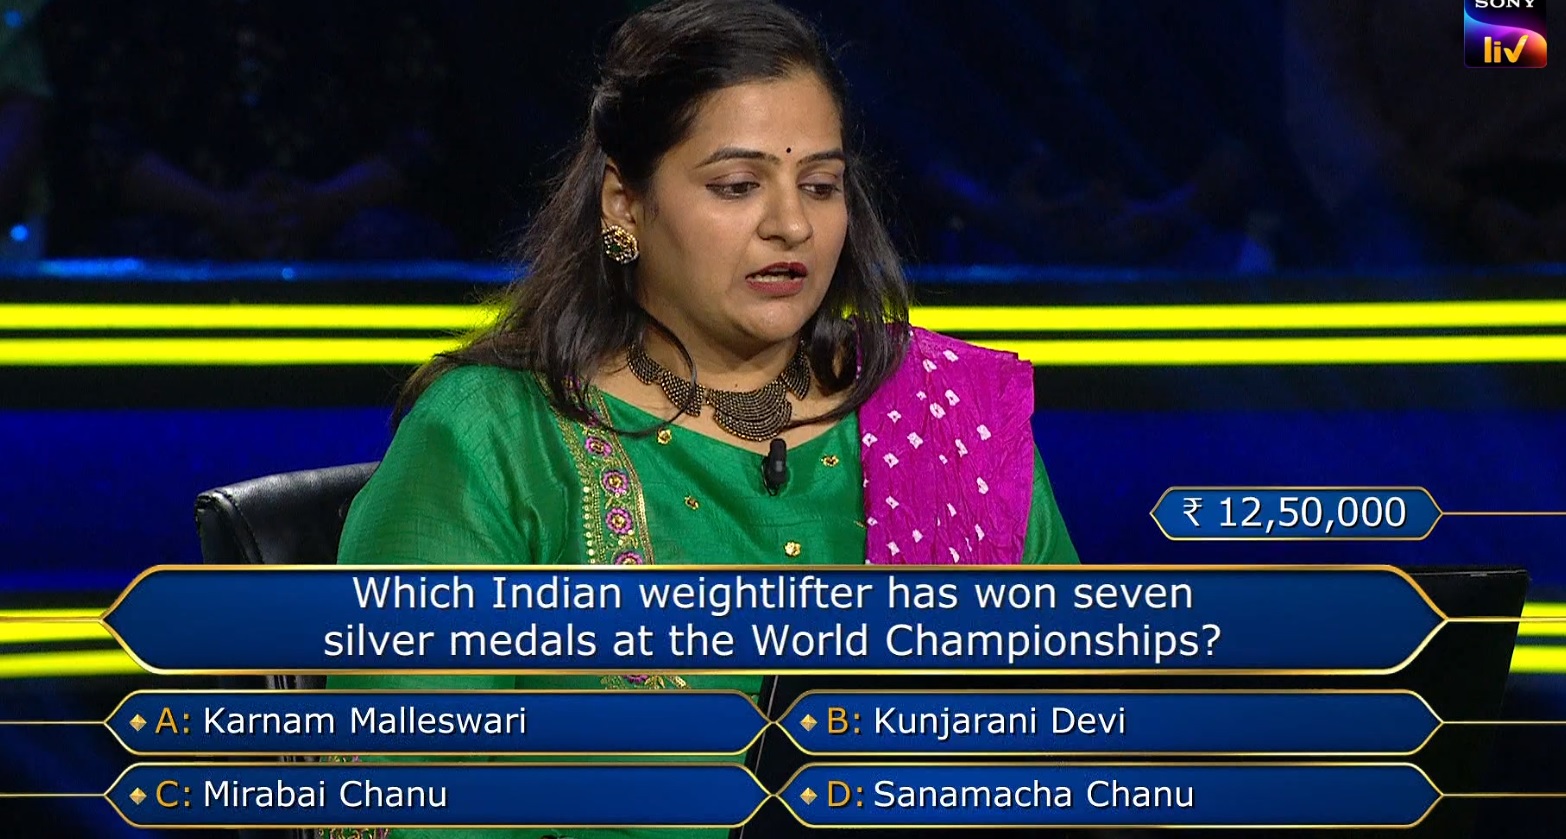 Ques : Which Indian weightlifter has won seven silver medals at the world Championships?